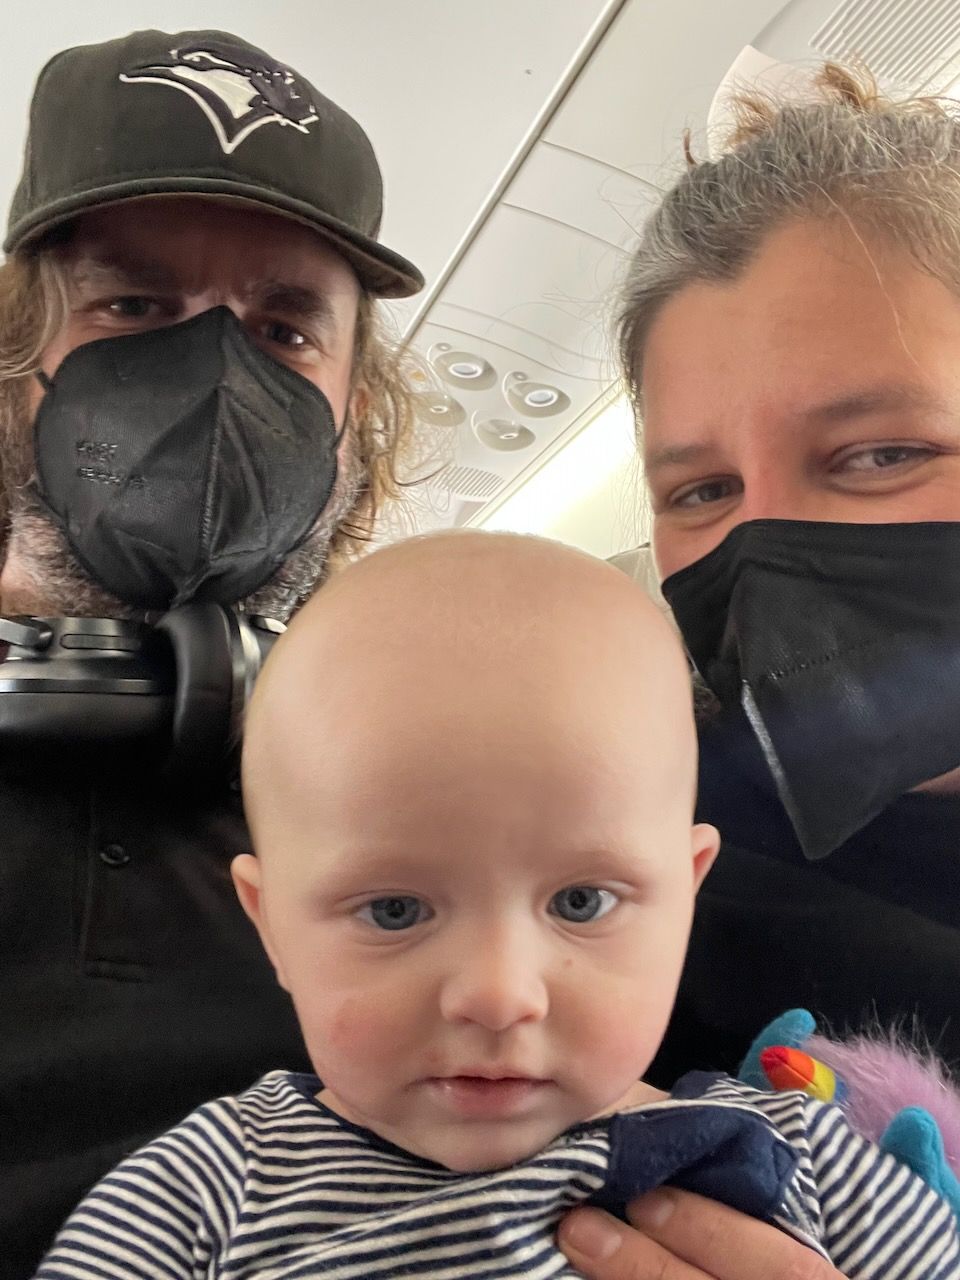 A selfie of a baby and a couple, on a plane.